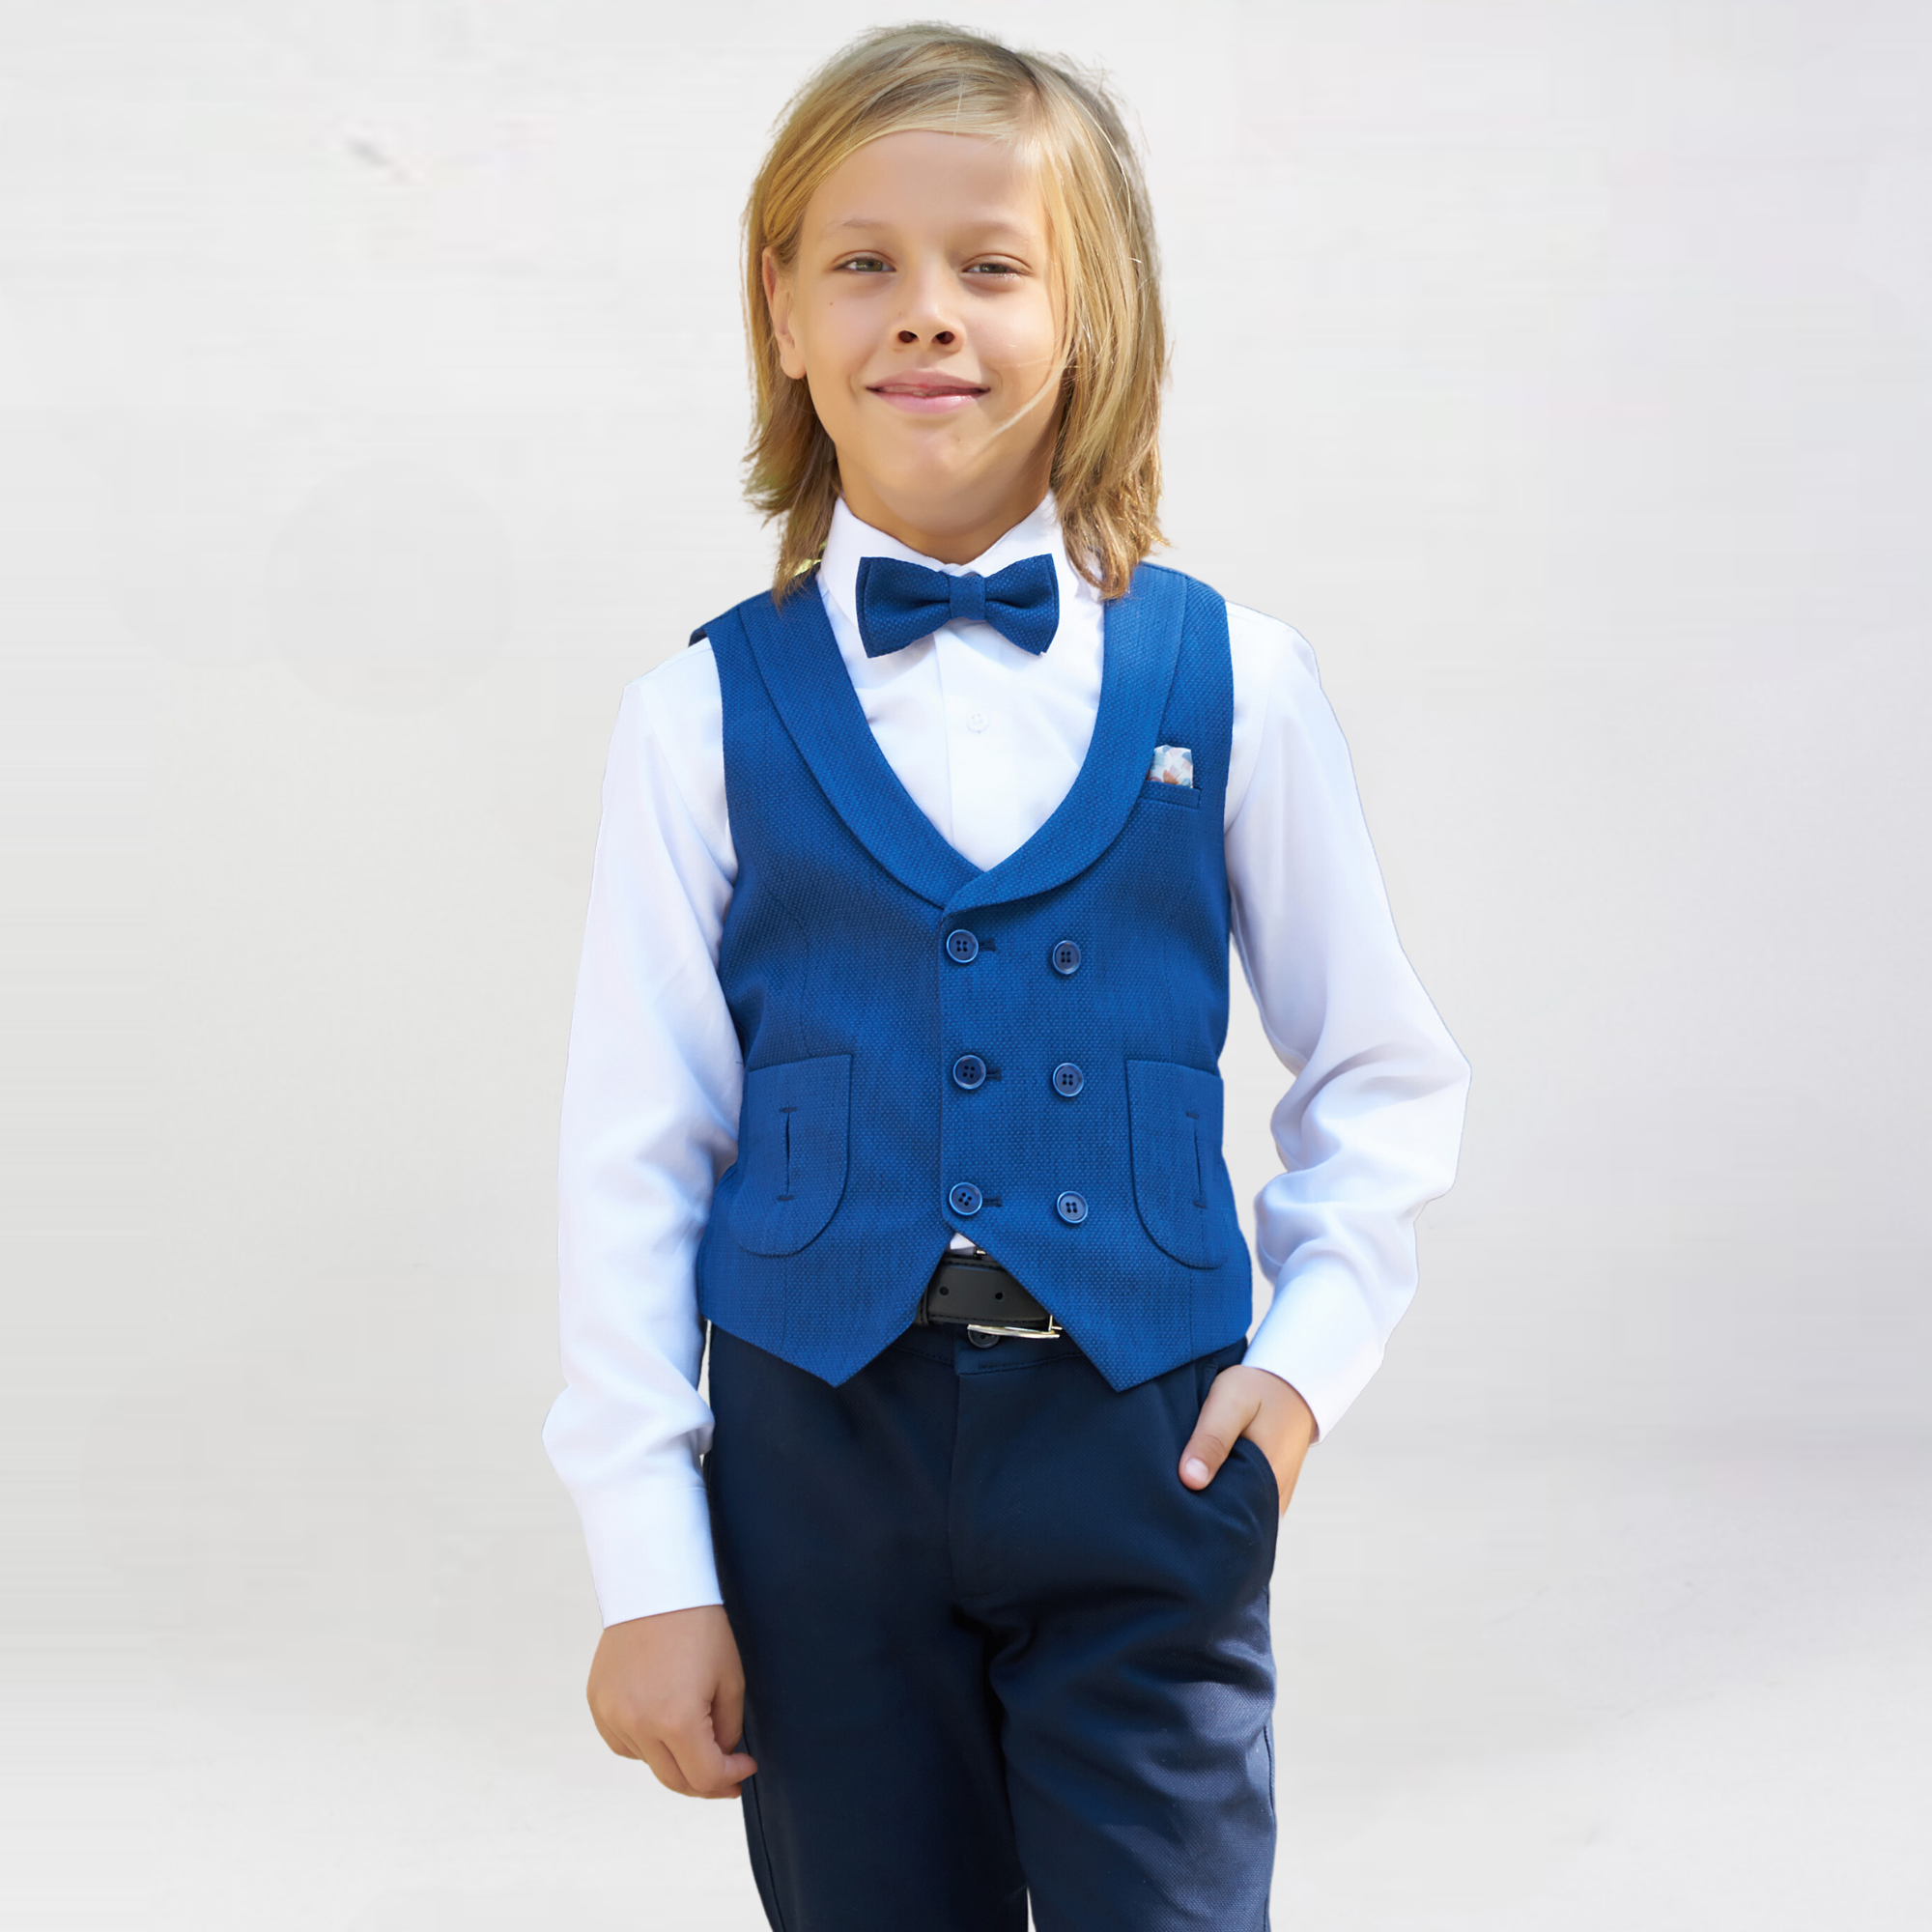 Romeo Real Formal Boys Suit